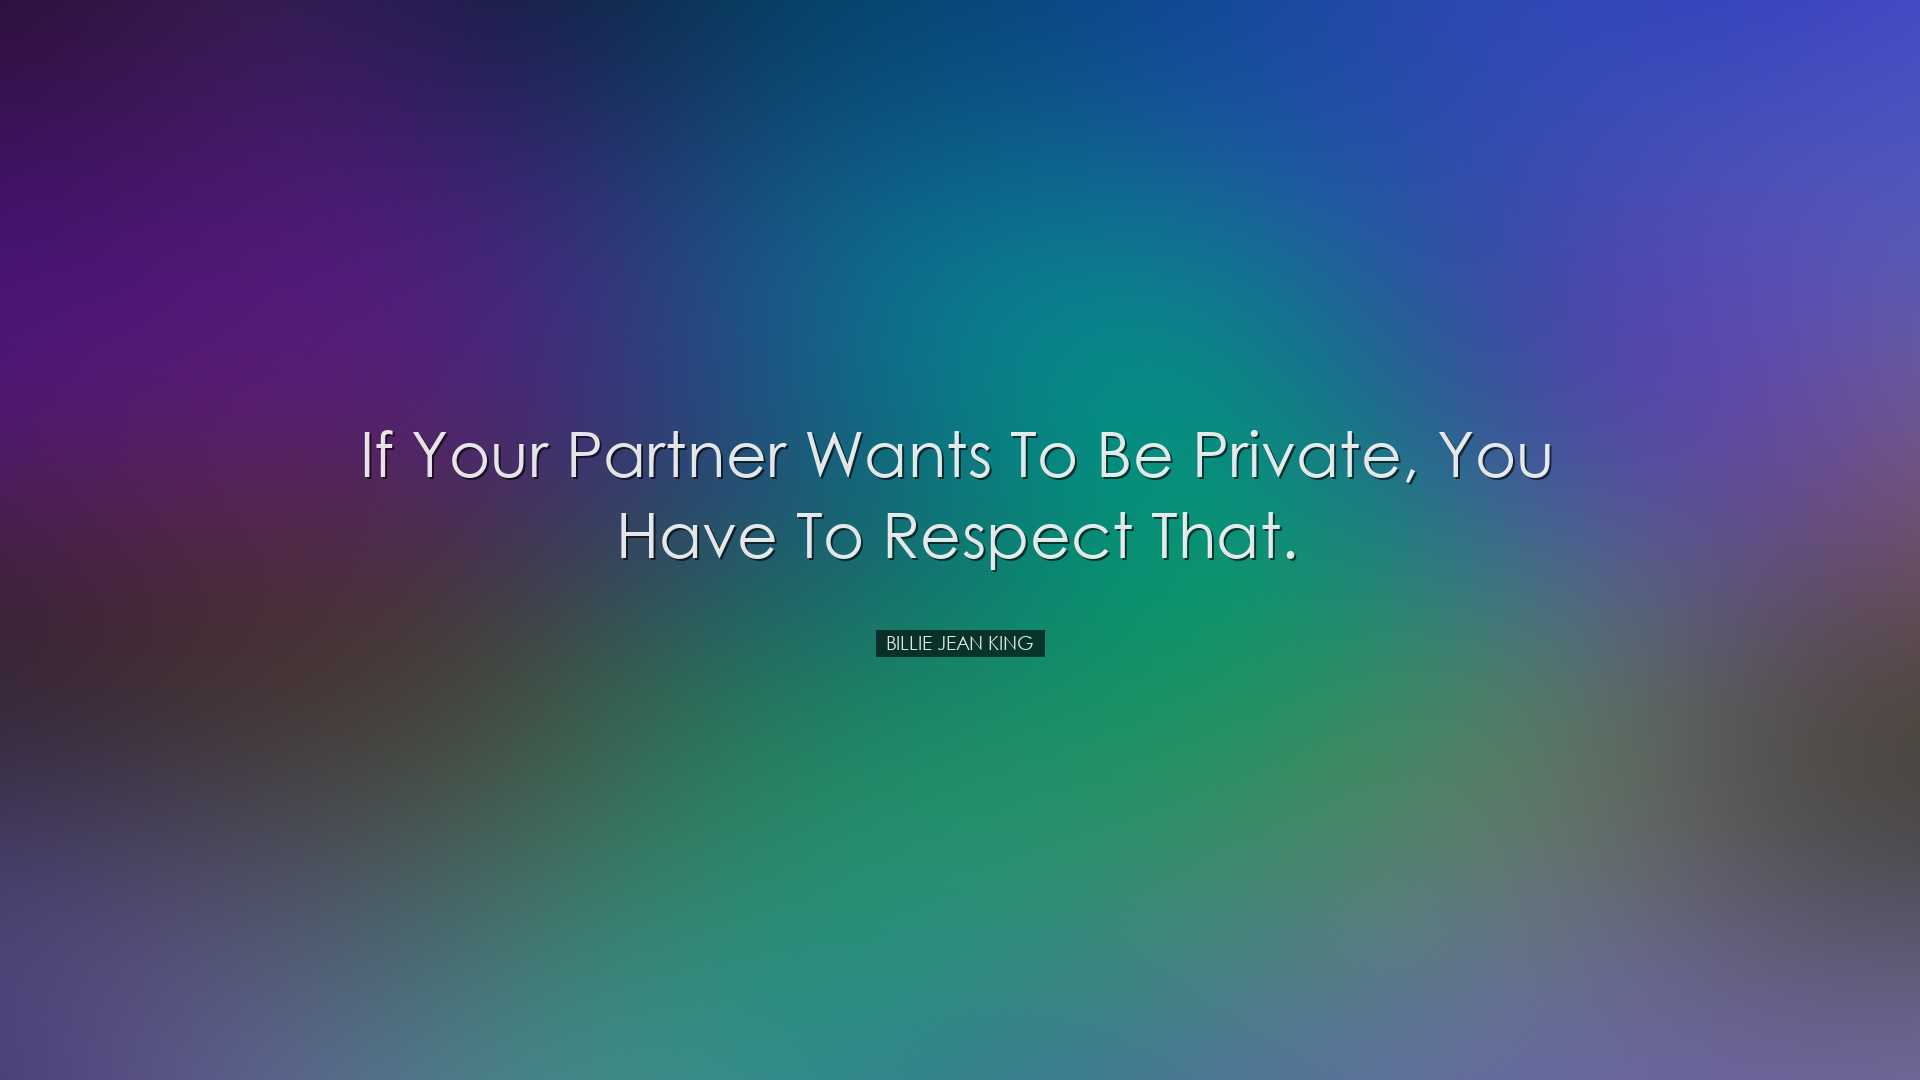 If your partner wants to be private, you have to respect that. - B